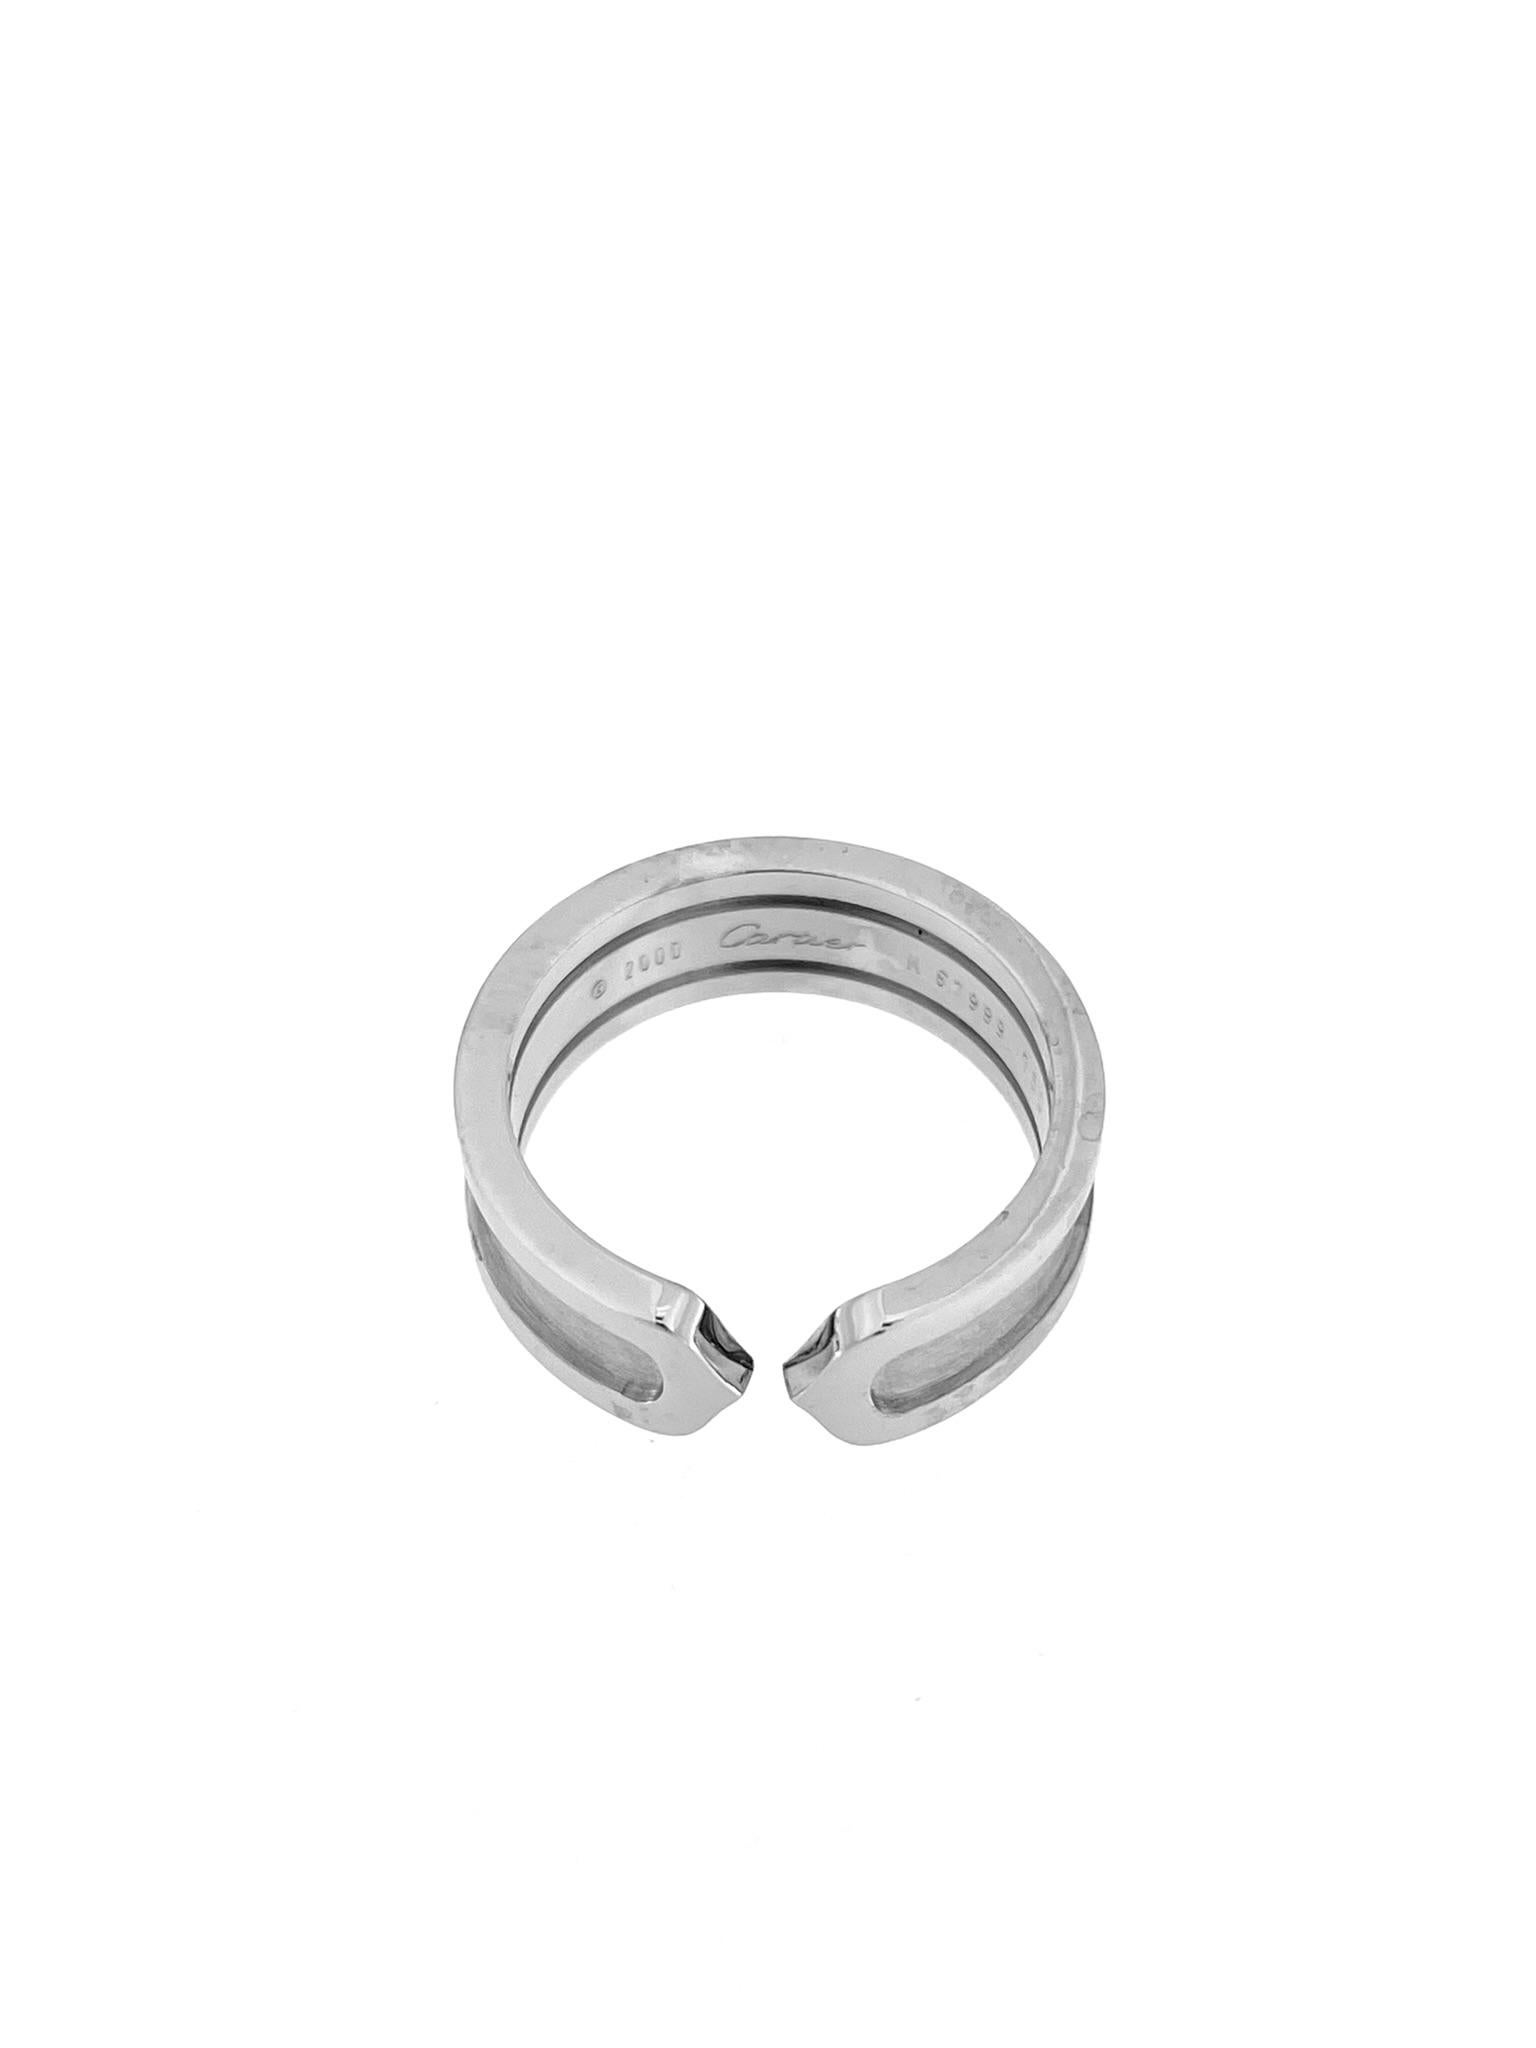 Cartier C Collection Ring 18 karat White Gold For Sale 2